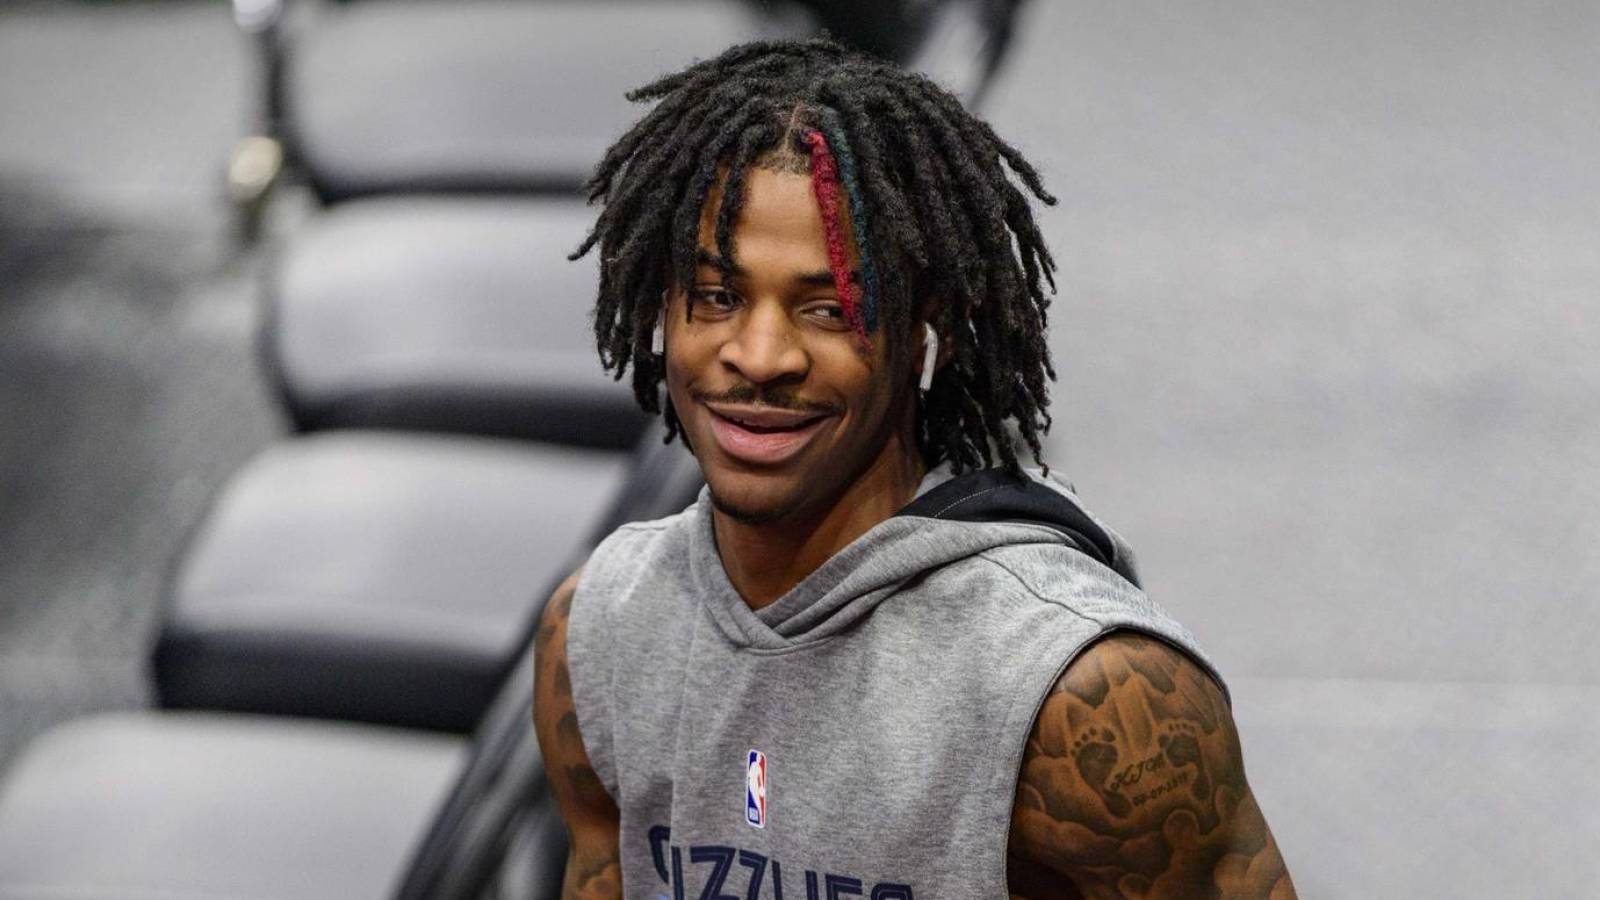 Ja Morant reacts to not making NBA All-Star team.